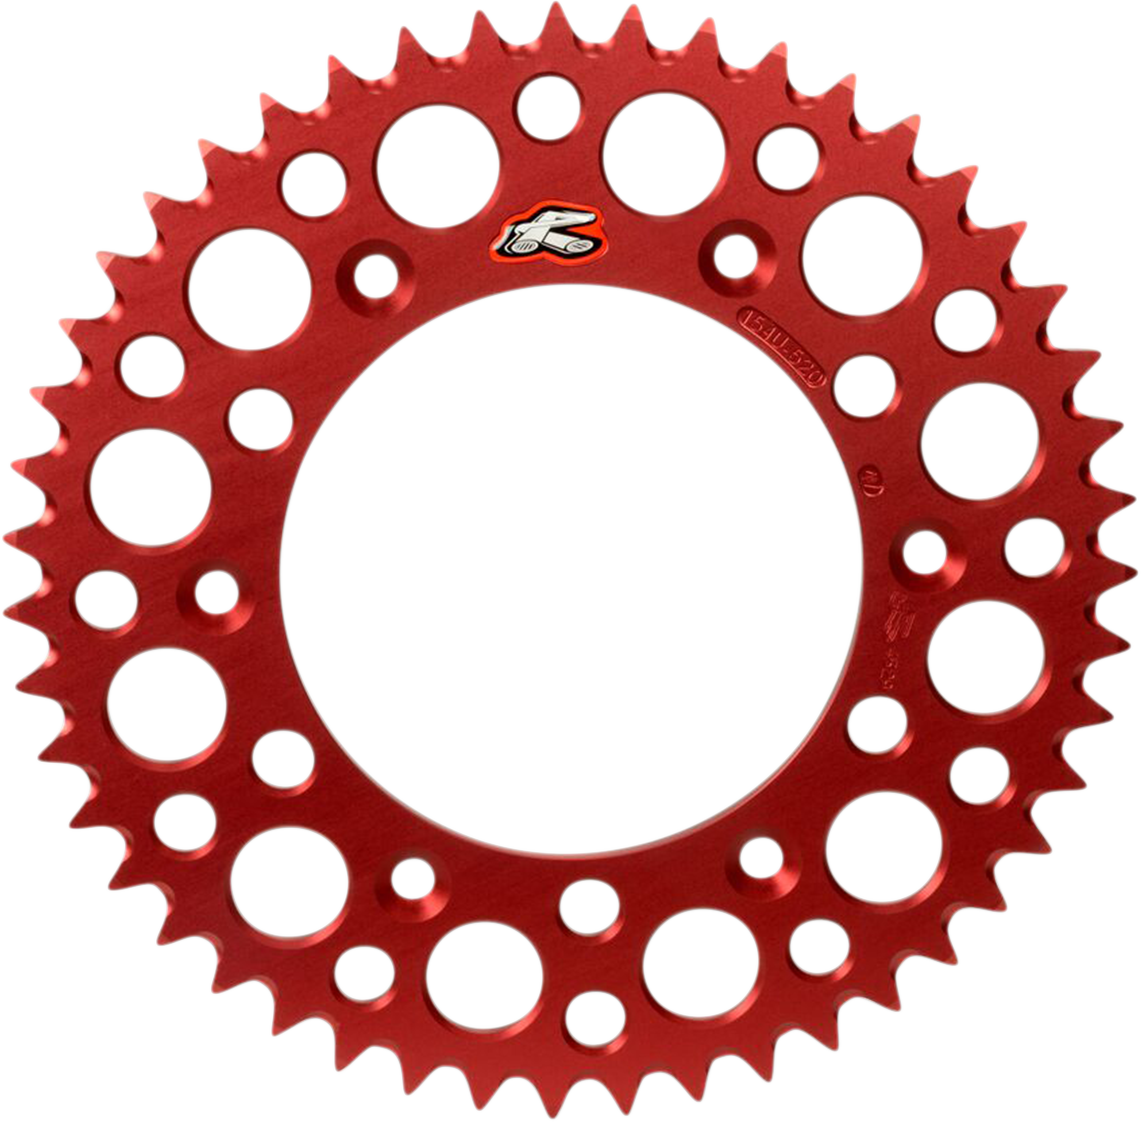 RENTHAL Twinring™ Rear Sprocket - 51 Tooth - Red 1540-520-51GPRD